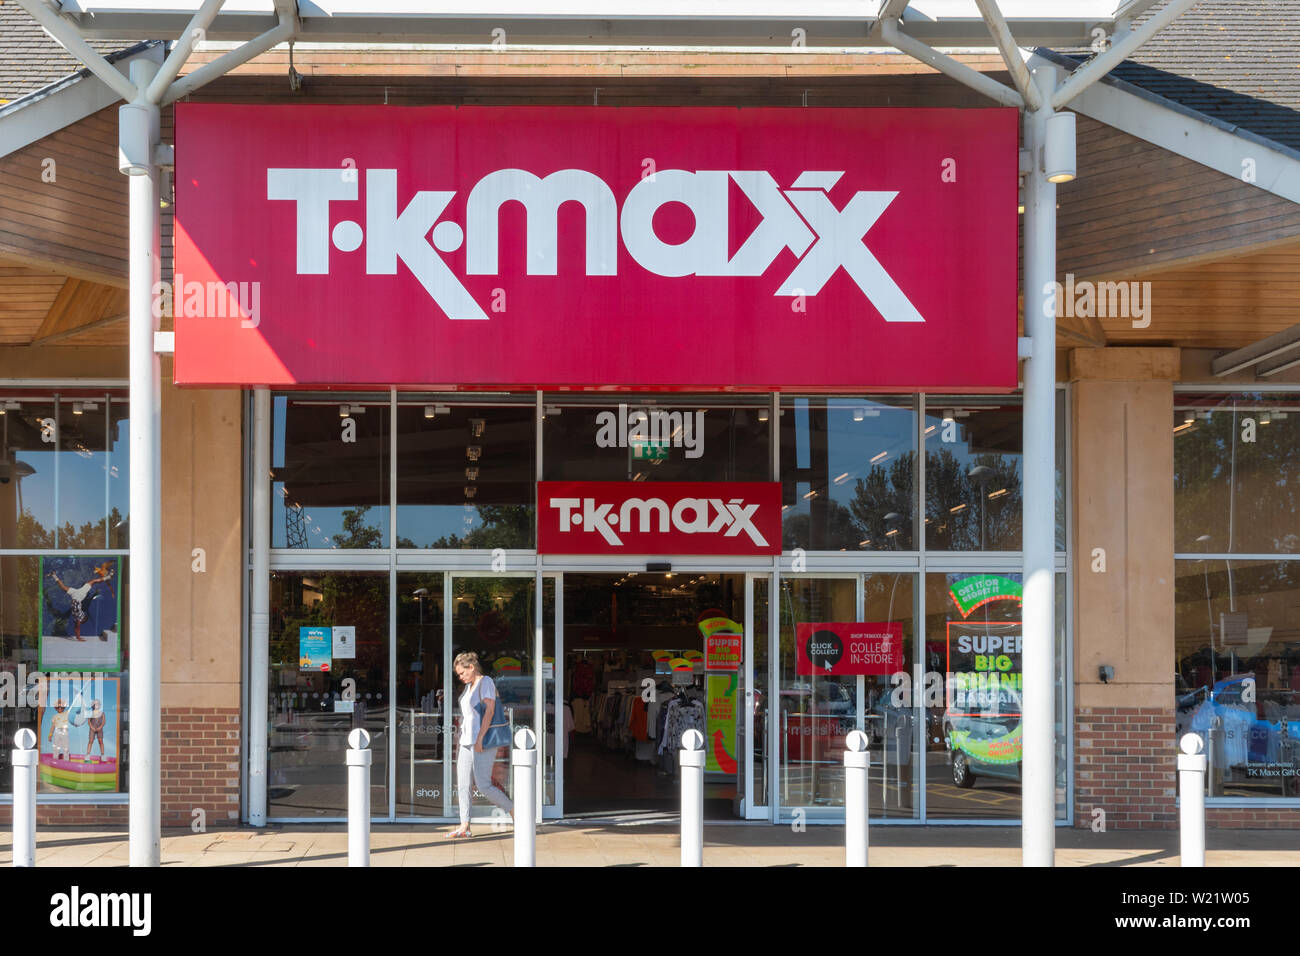 TK Maxx shop or store, retailer of fashion clothes and homeware, UK Stock Photo